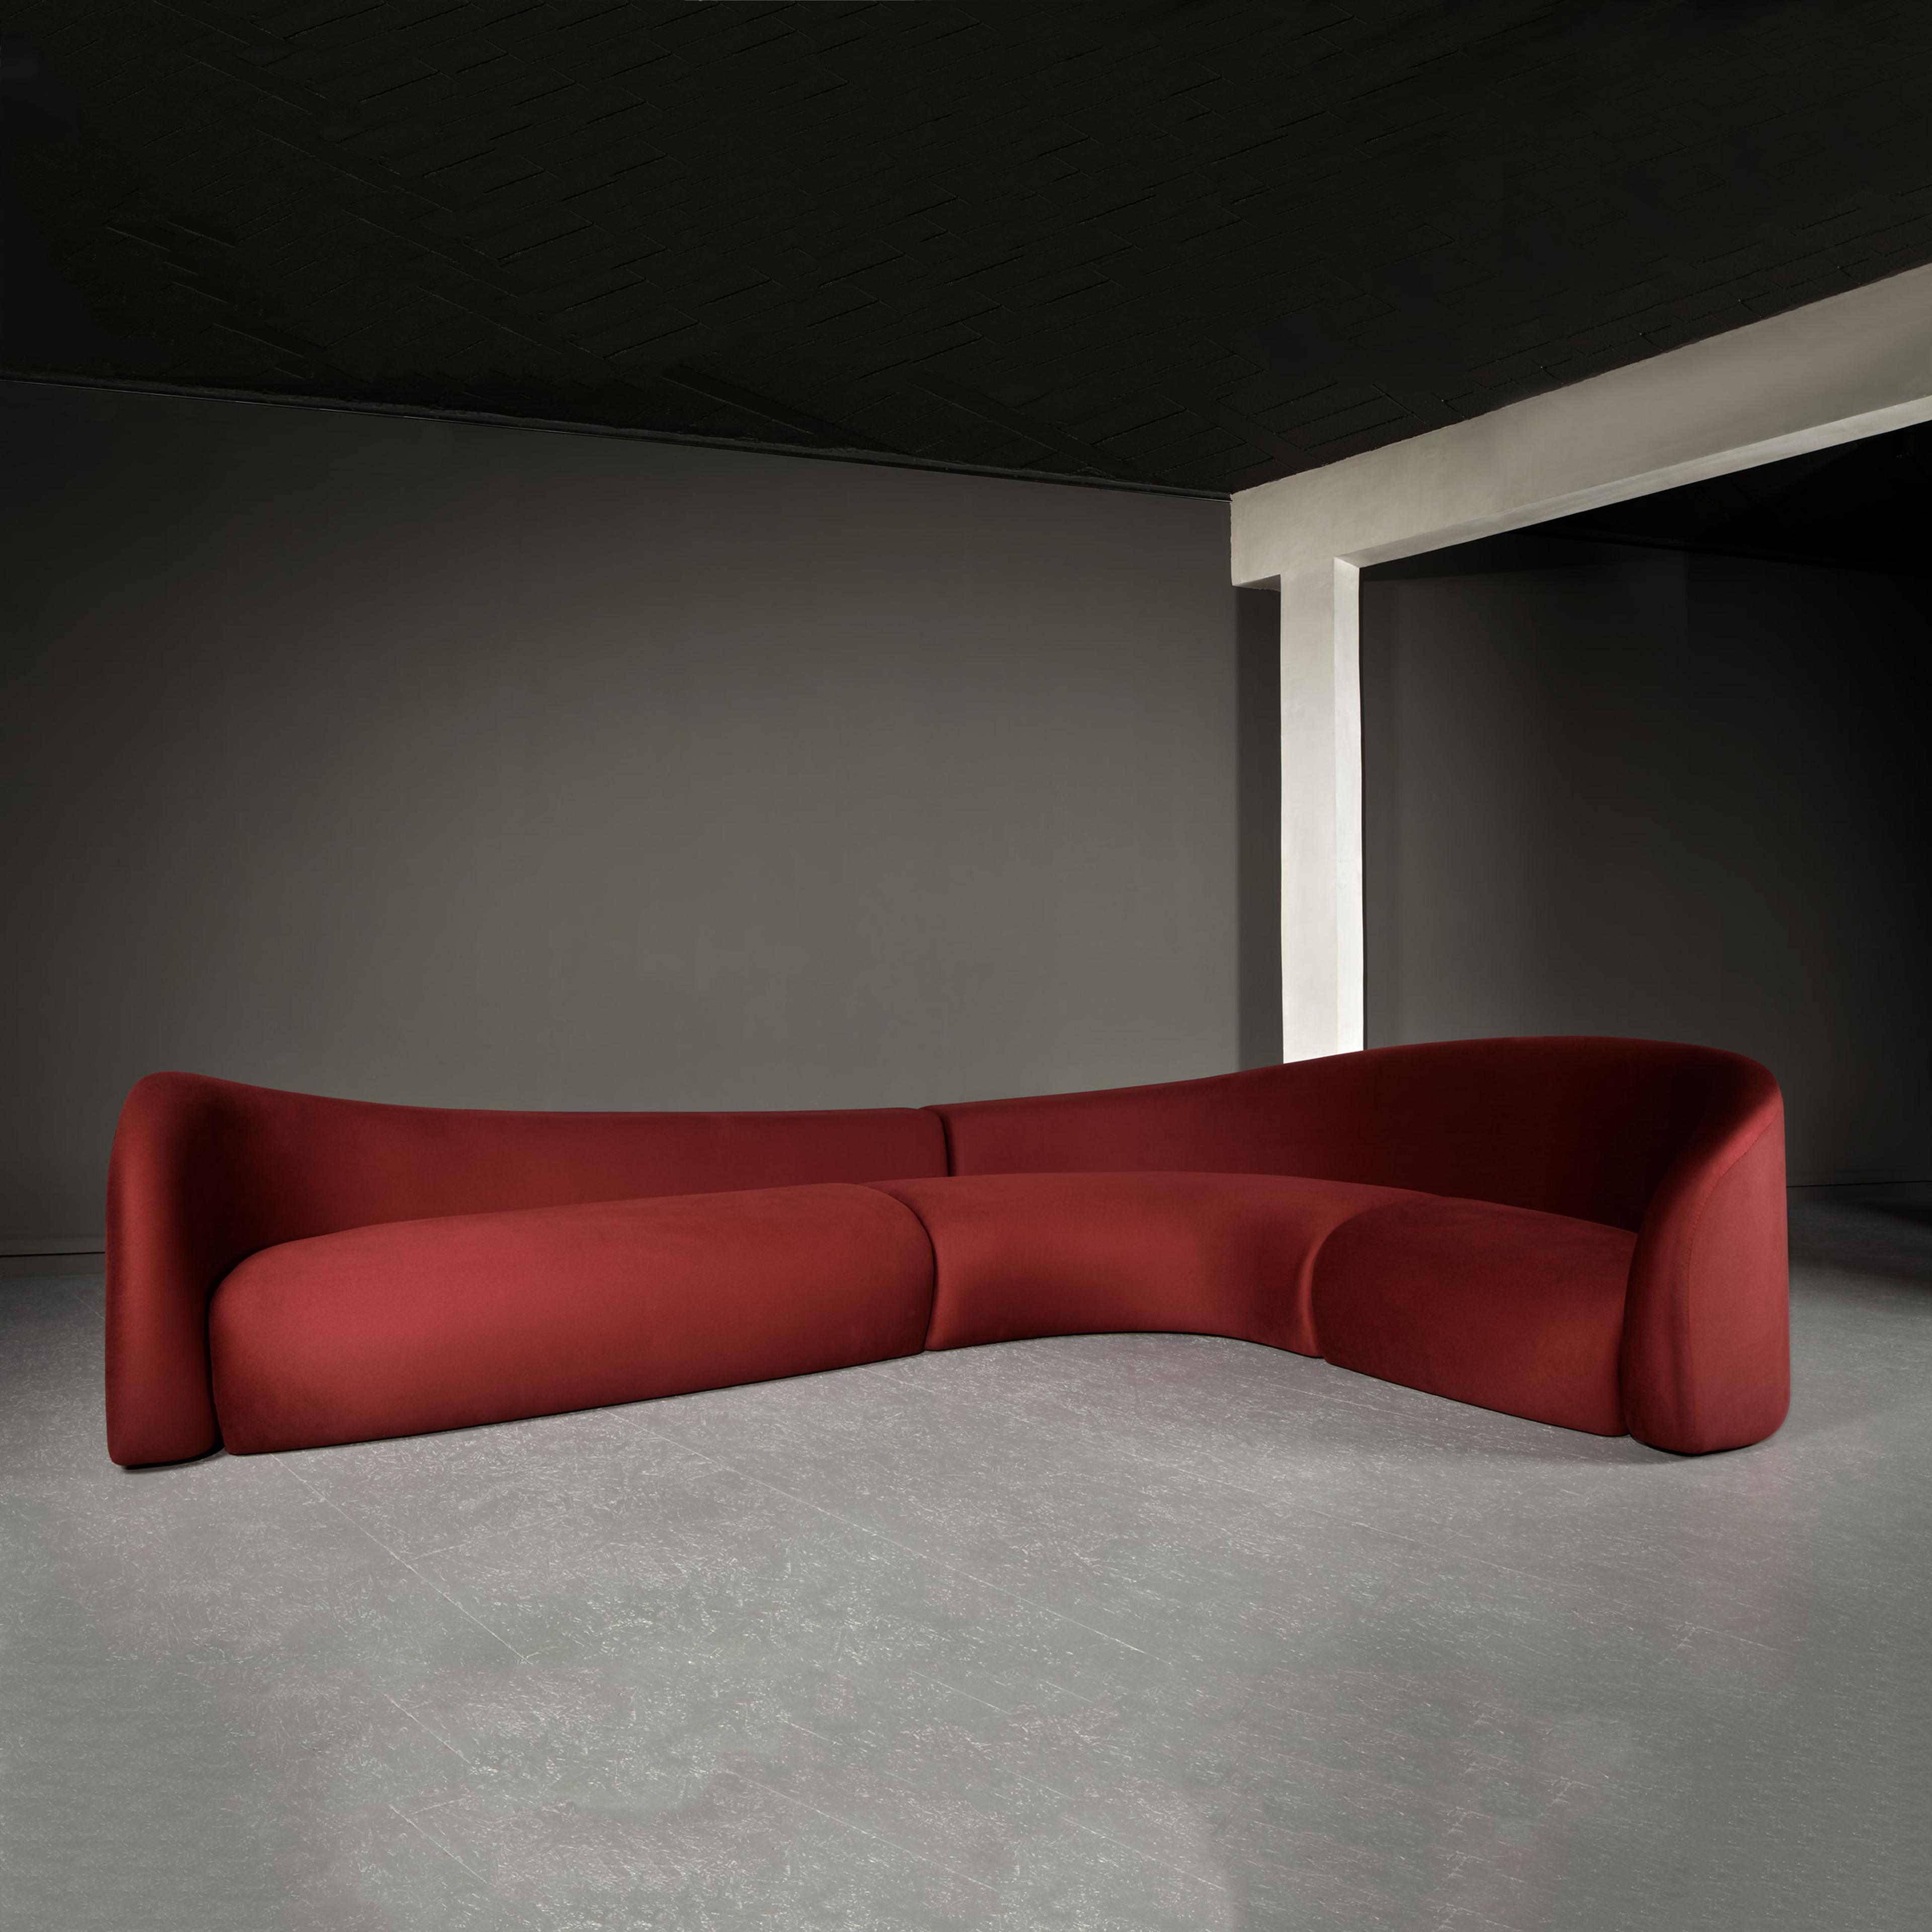 MOON SOFA BY RAPHAEL NAVOT HAND CRAFTED AND PUBLISHED BY DOMEAU PERES EDITIONS FOR ATELIERS COURBET